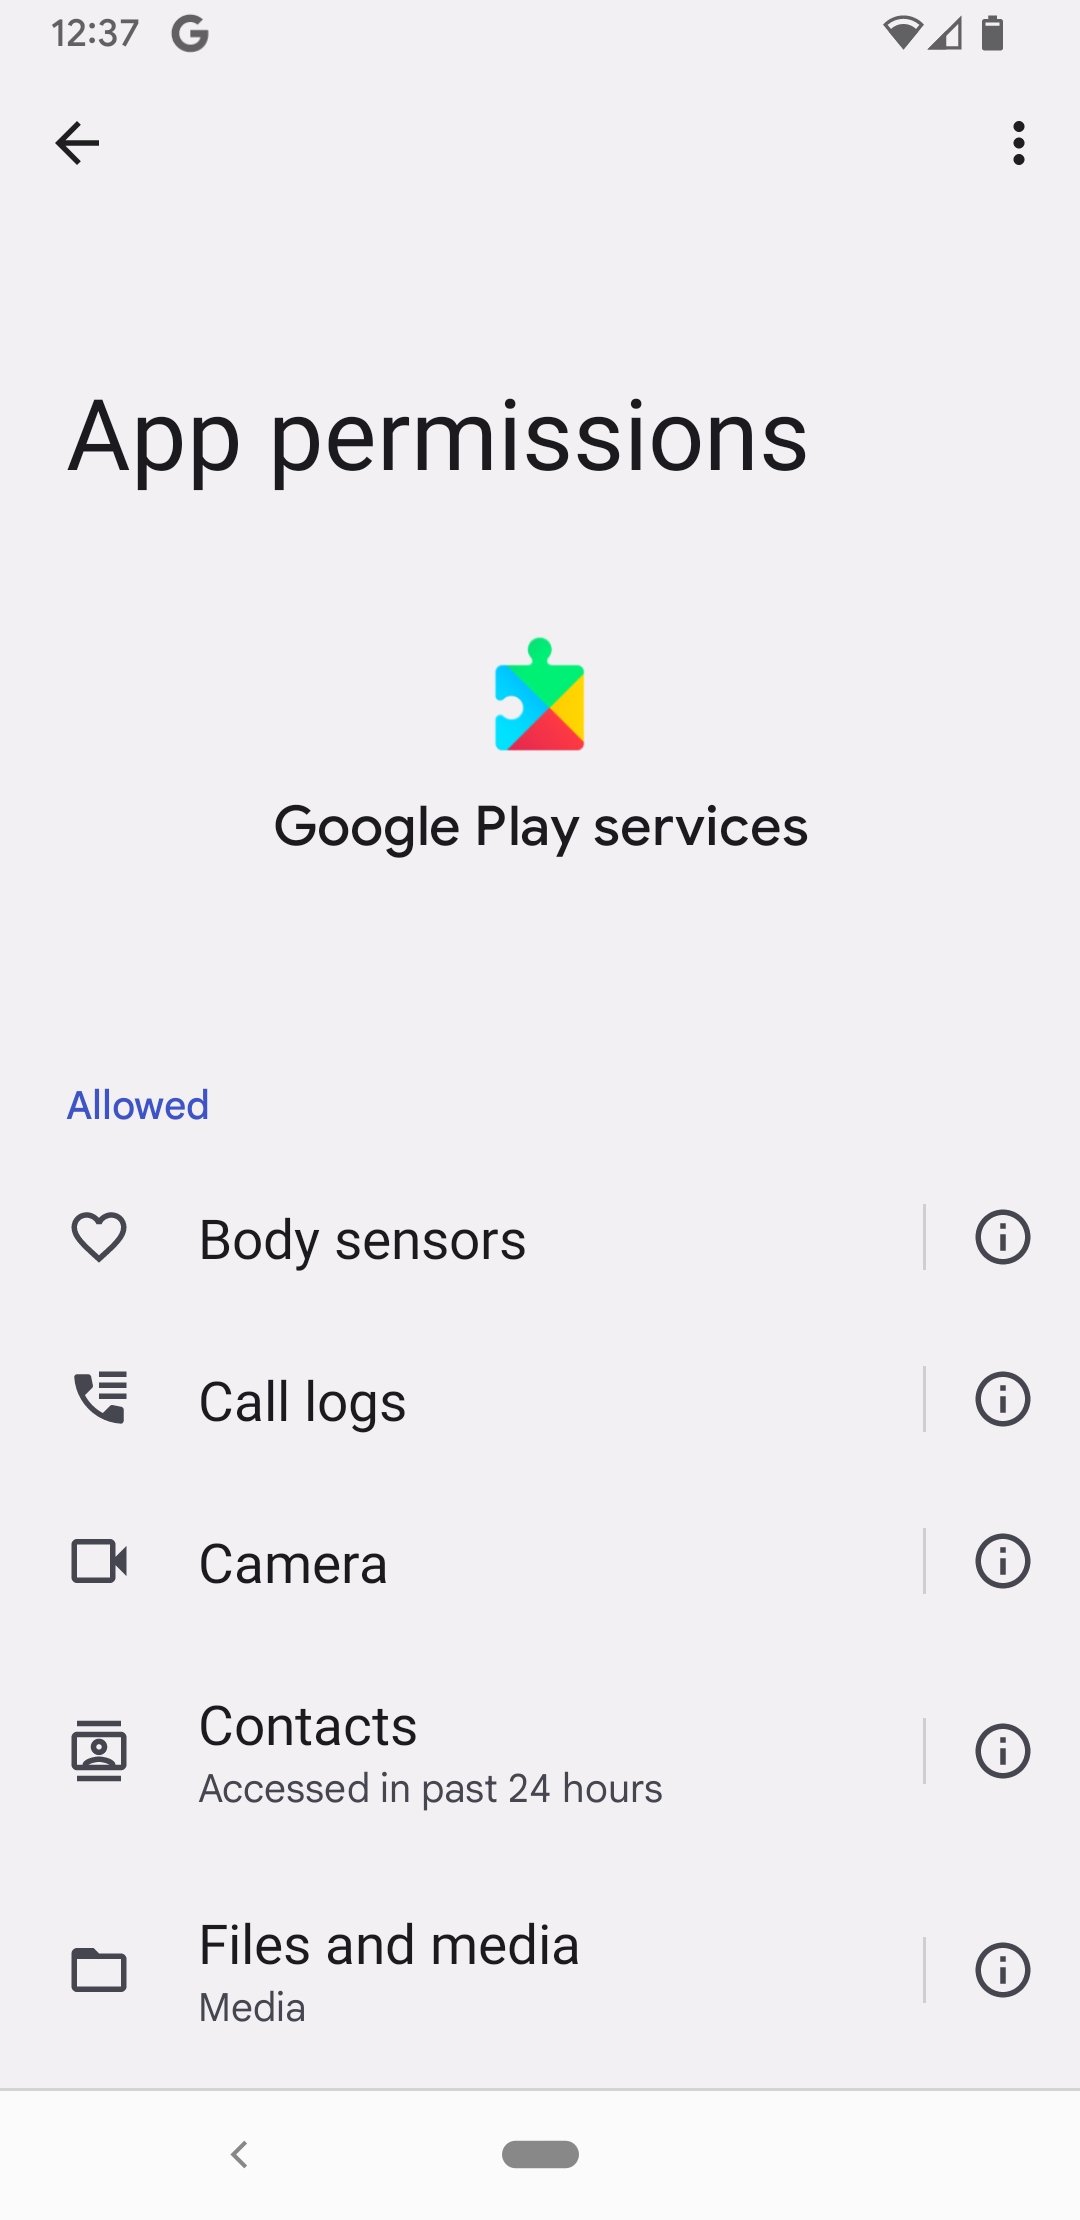 Body Solutions - Apps on Google Play